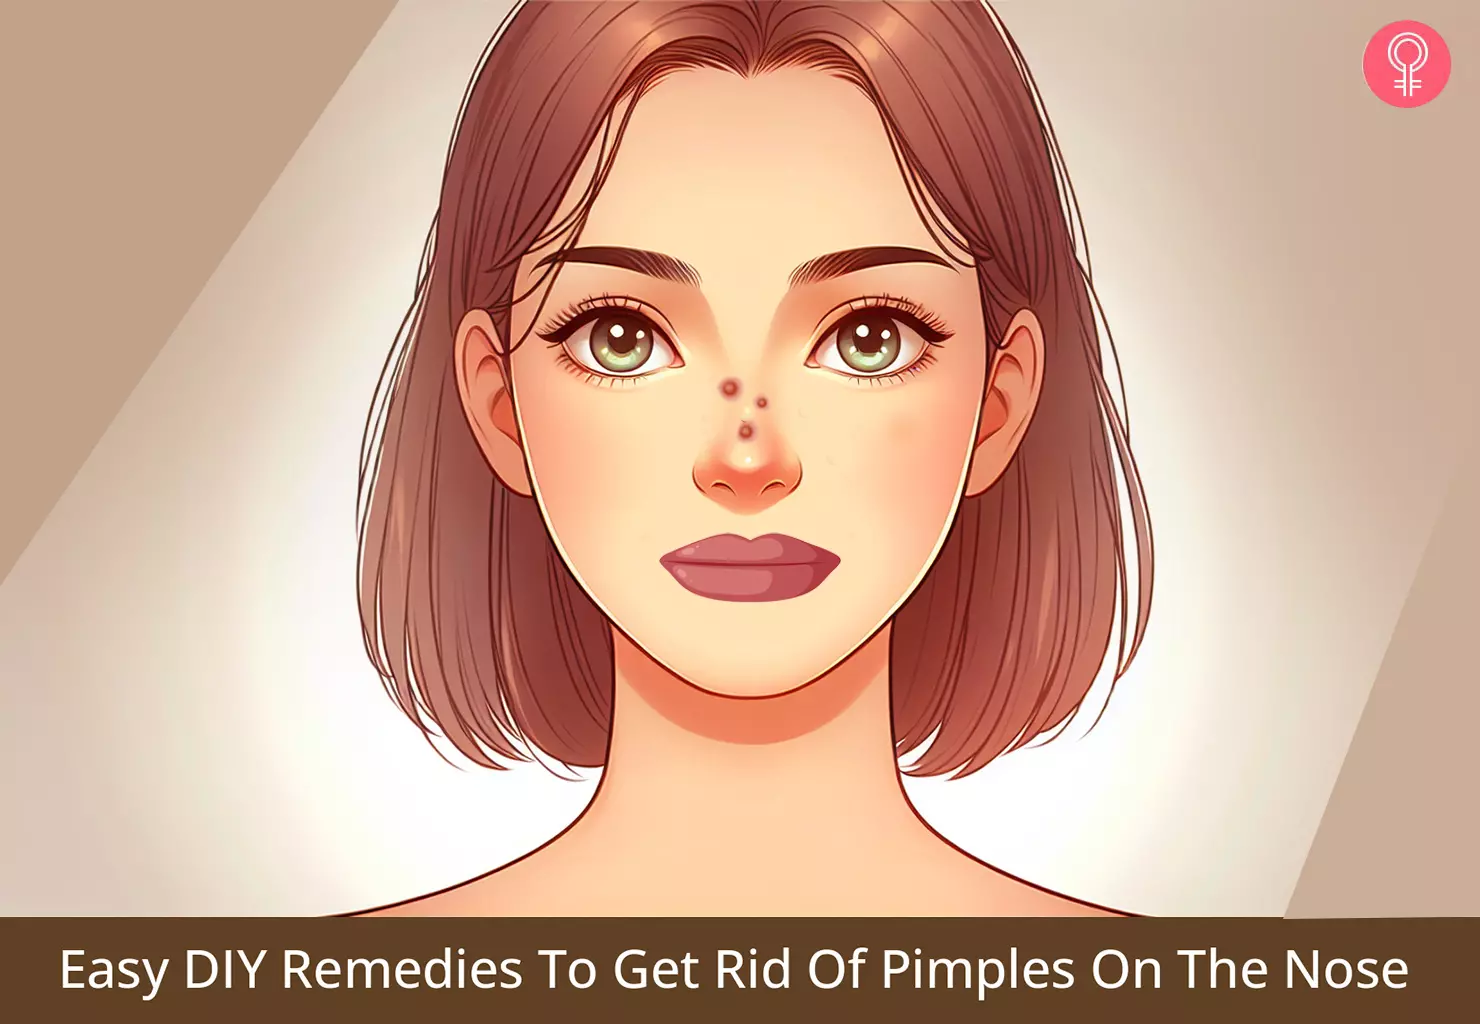 6 Easy DIY Remedies To Get Rid Of Pimples On The Nose